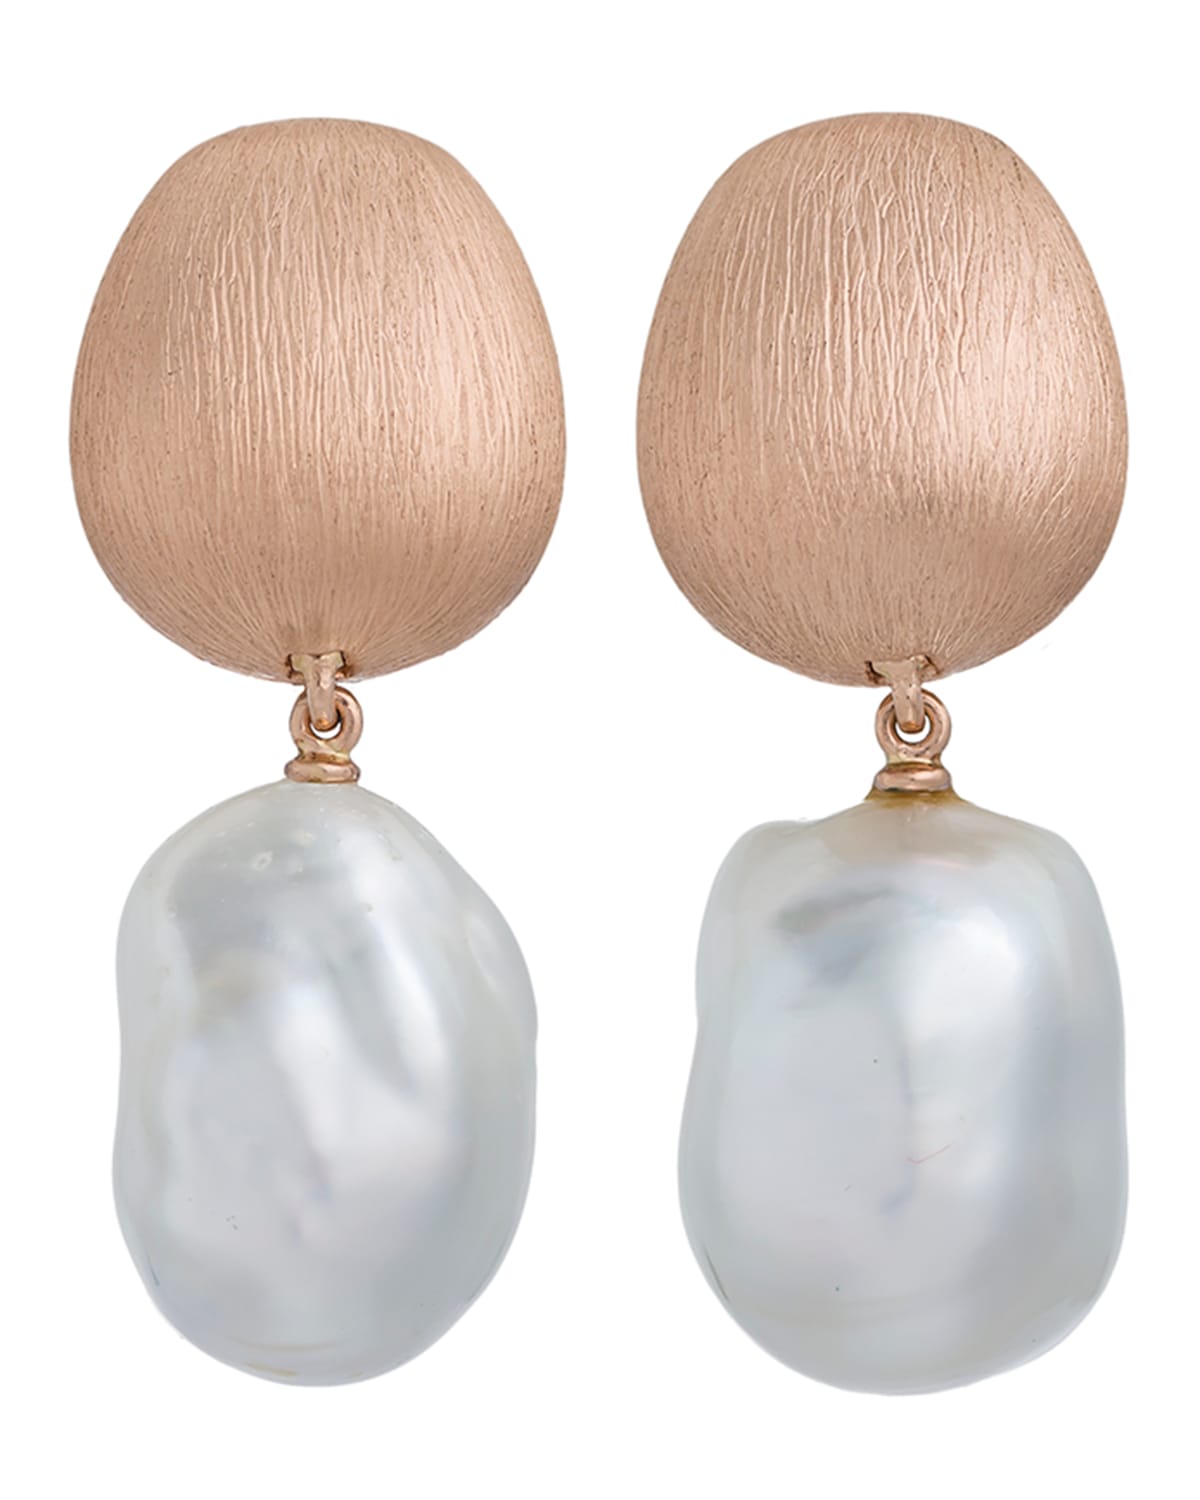 Margot McKinney Jewelry Satin-Finish Earrings with Detachable Pearl Drops in 18K Rose Gold